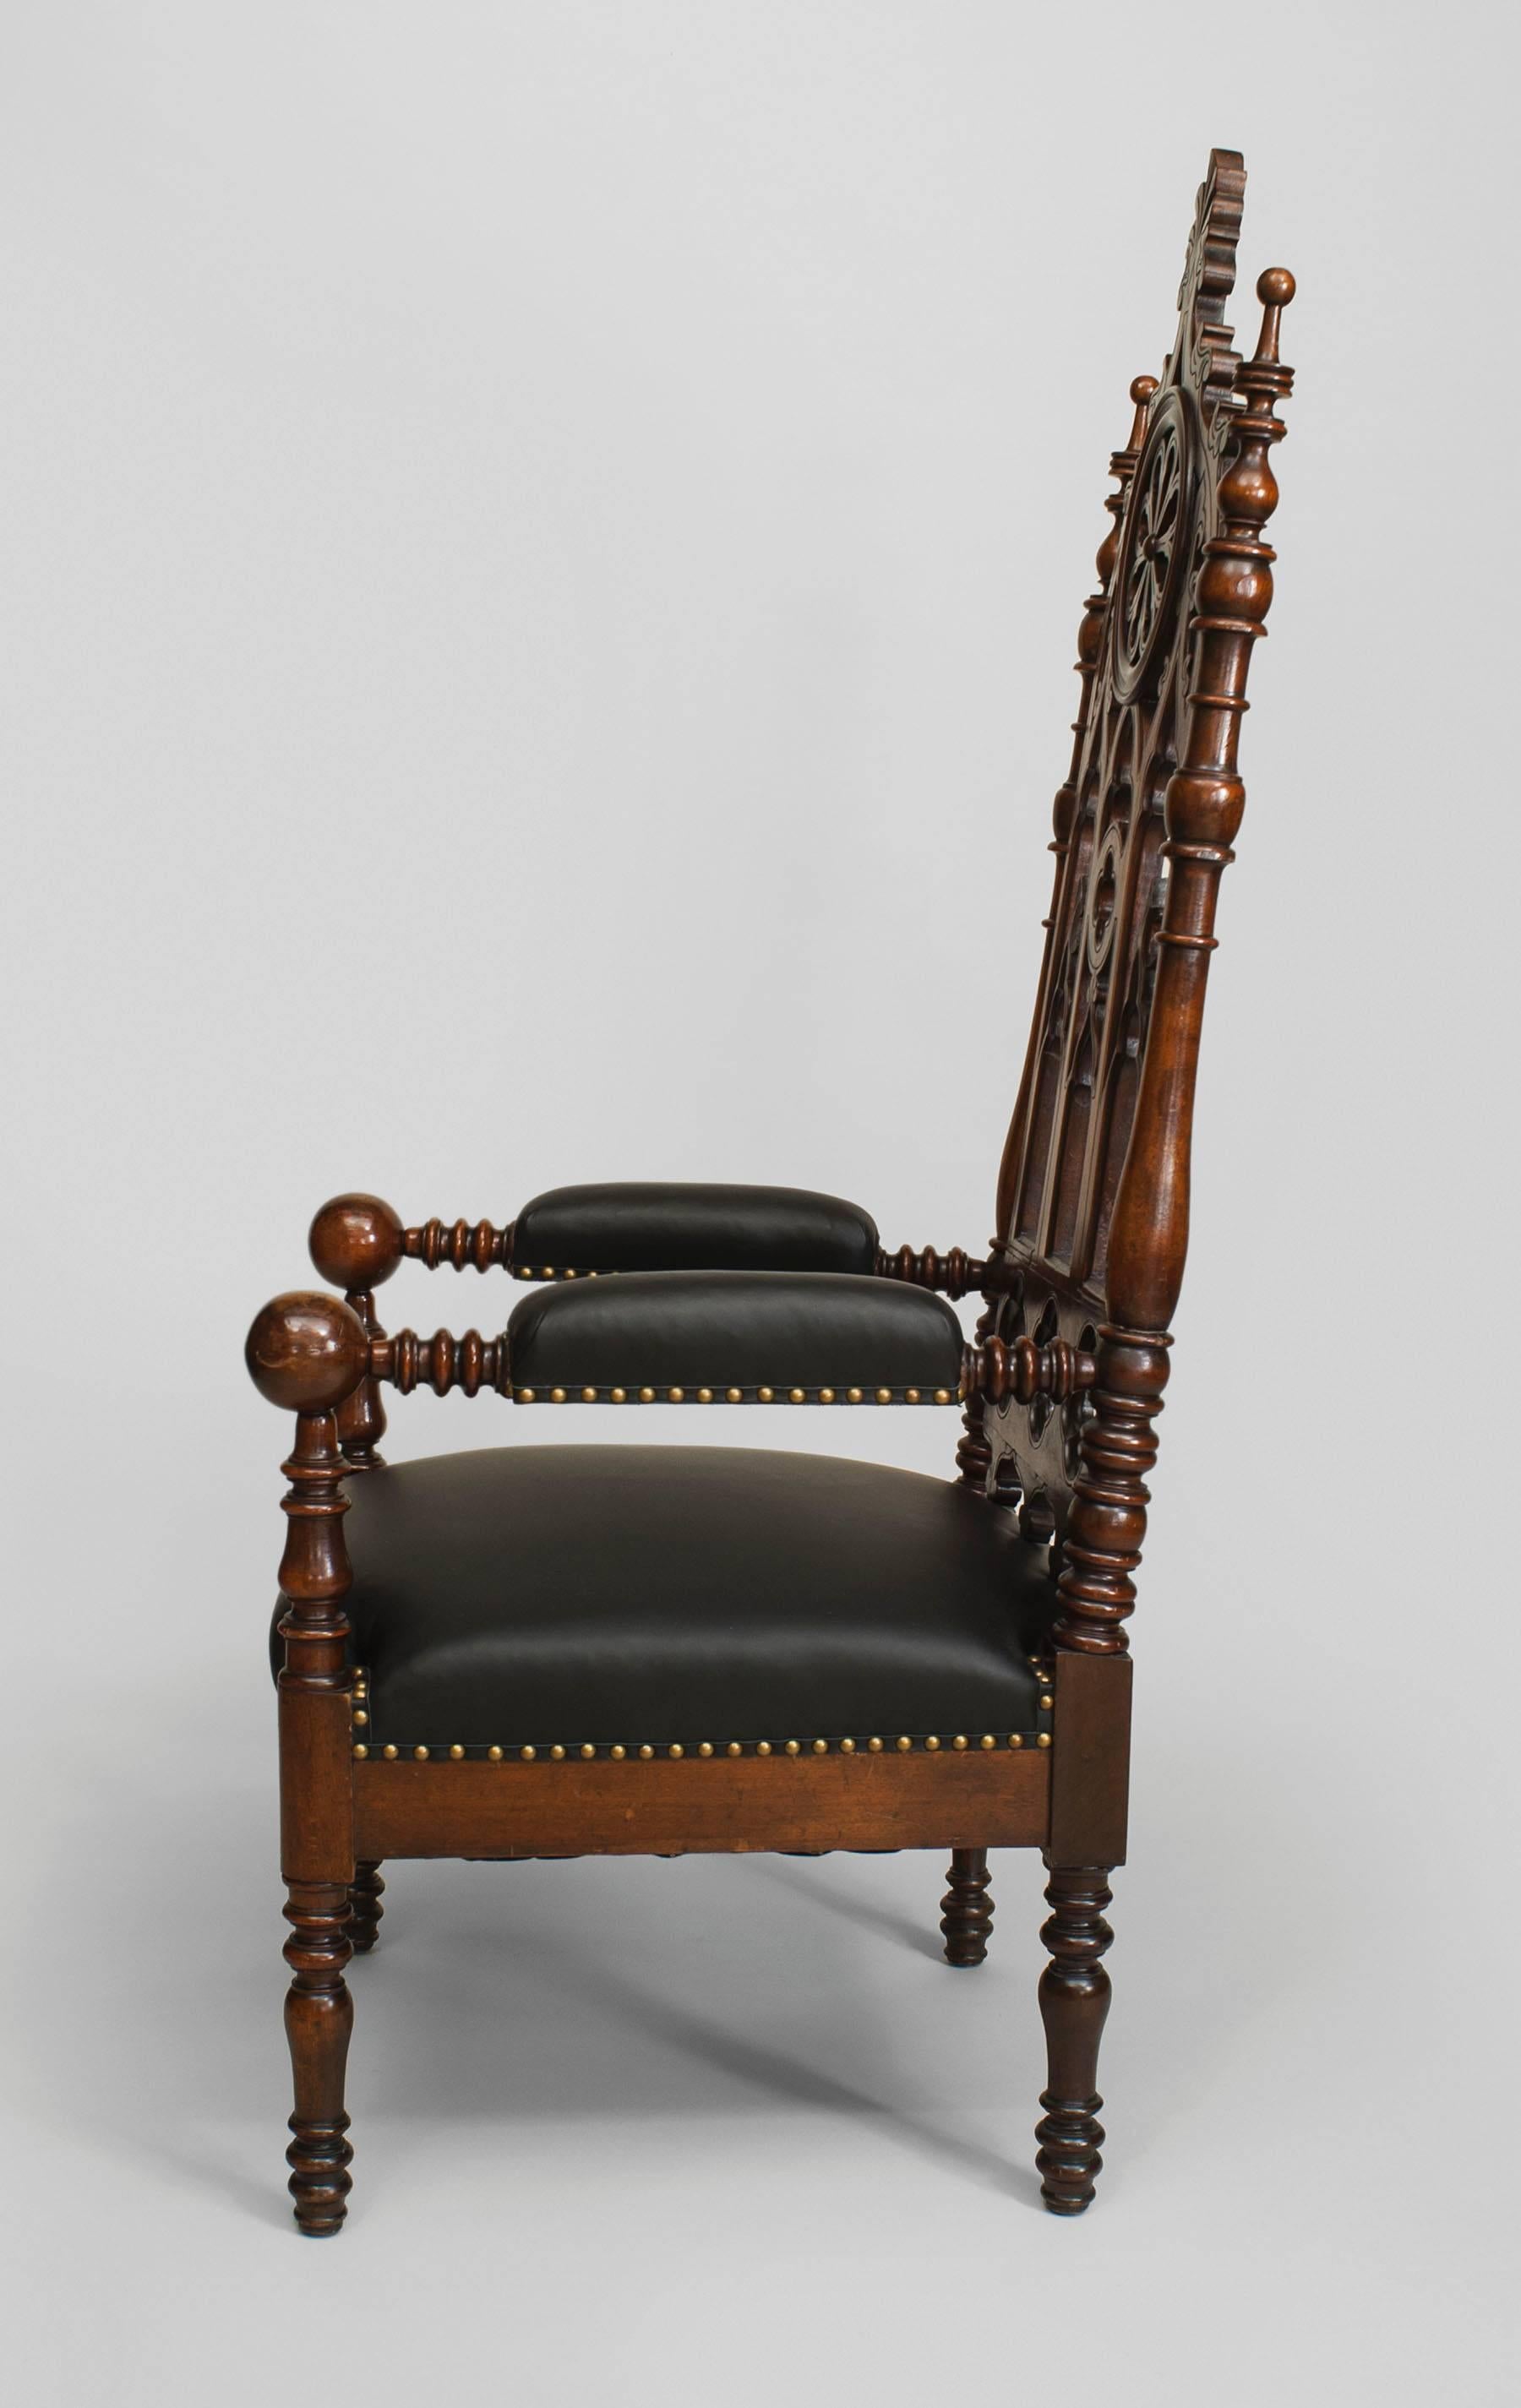 Pair of nineteenth century English Gothic Revival mahogany armchairs with brown leather seats and arm pads beneath high backs decorated with filigree carvings in imitation of Gothic architecture.